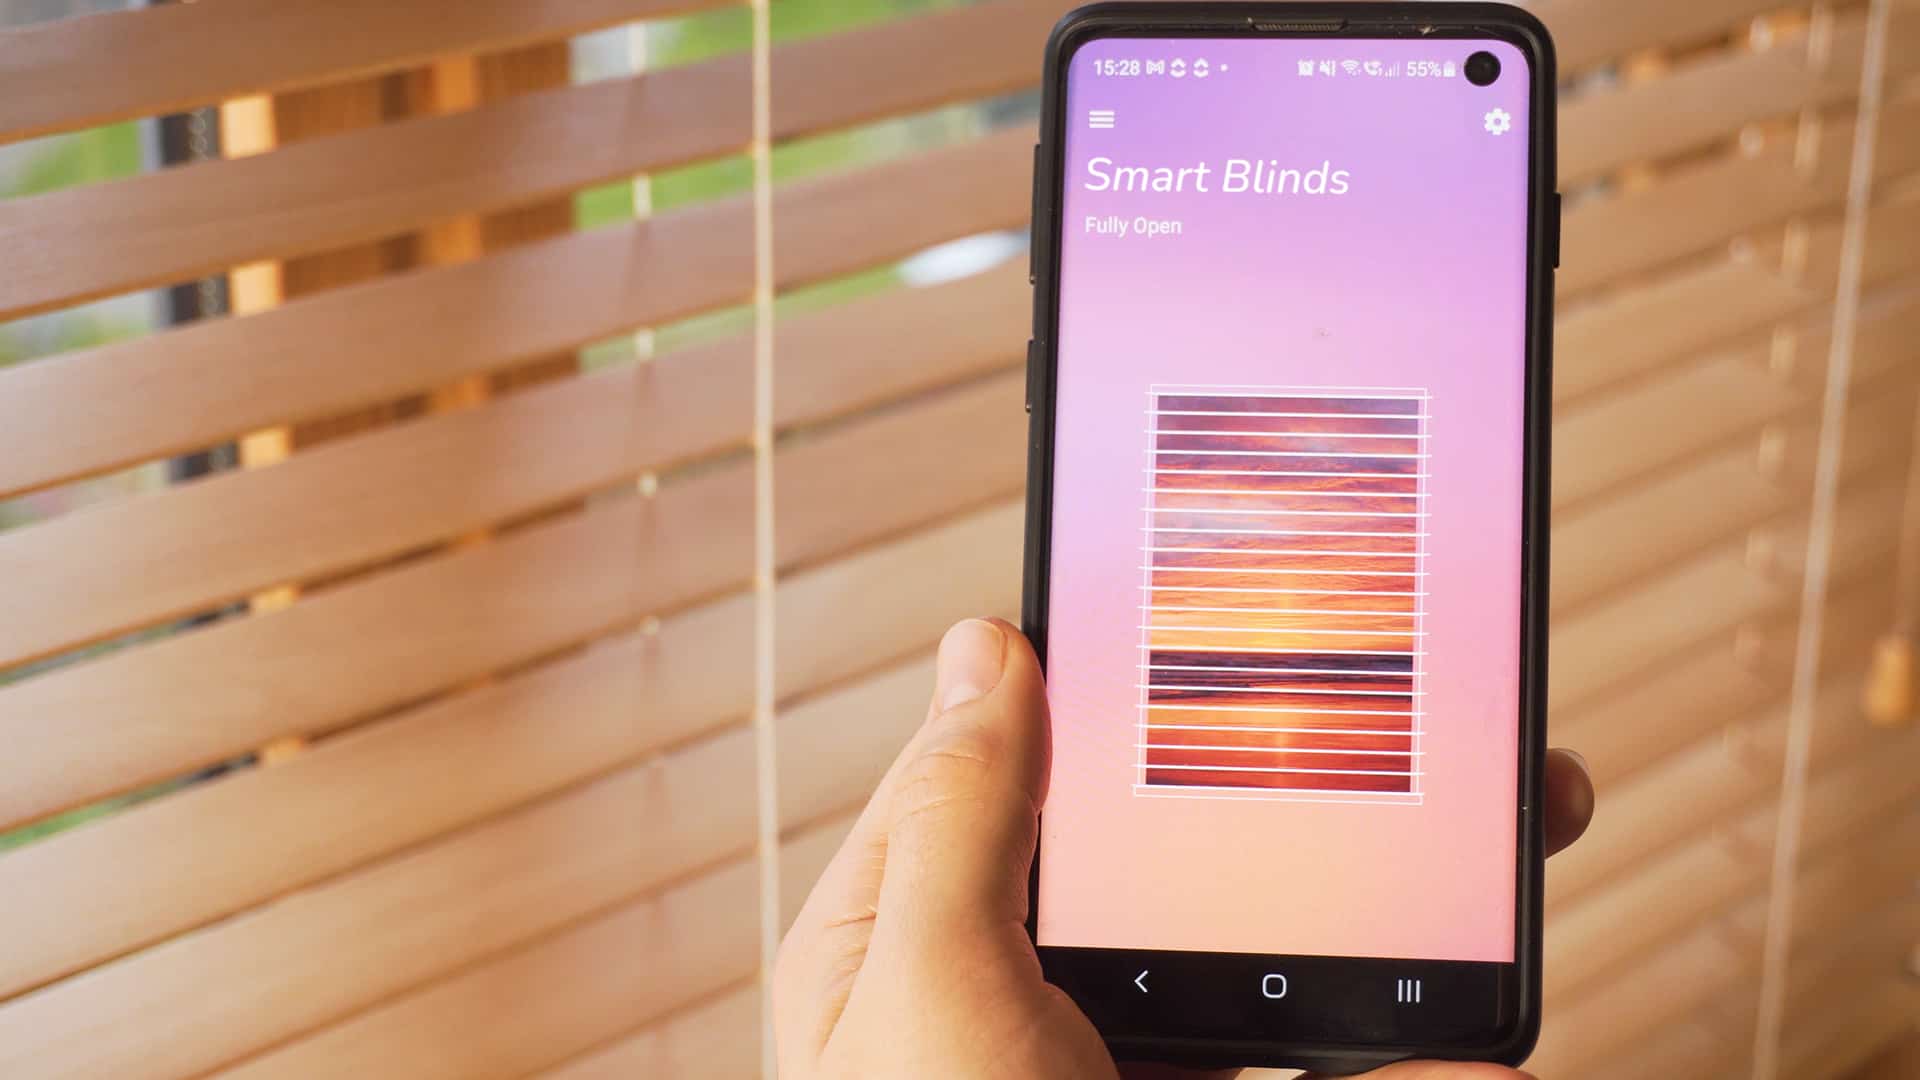 These Smart Blinds Are So Simple! - Soma Smart Blinds Review